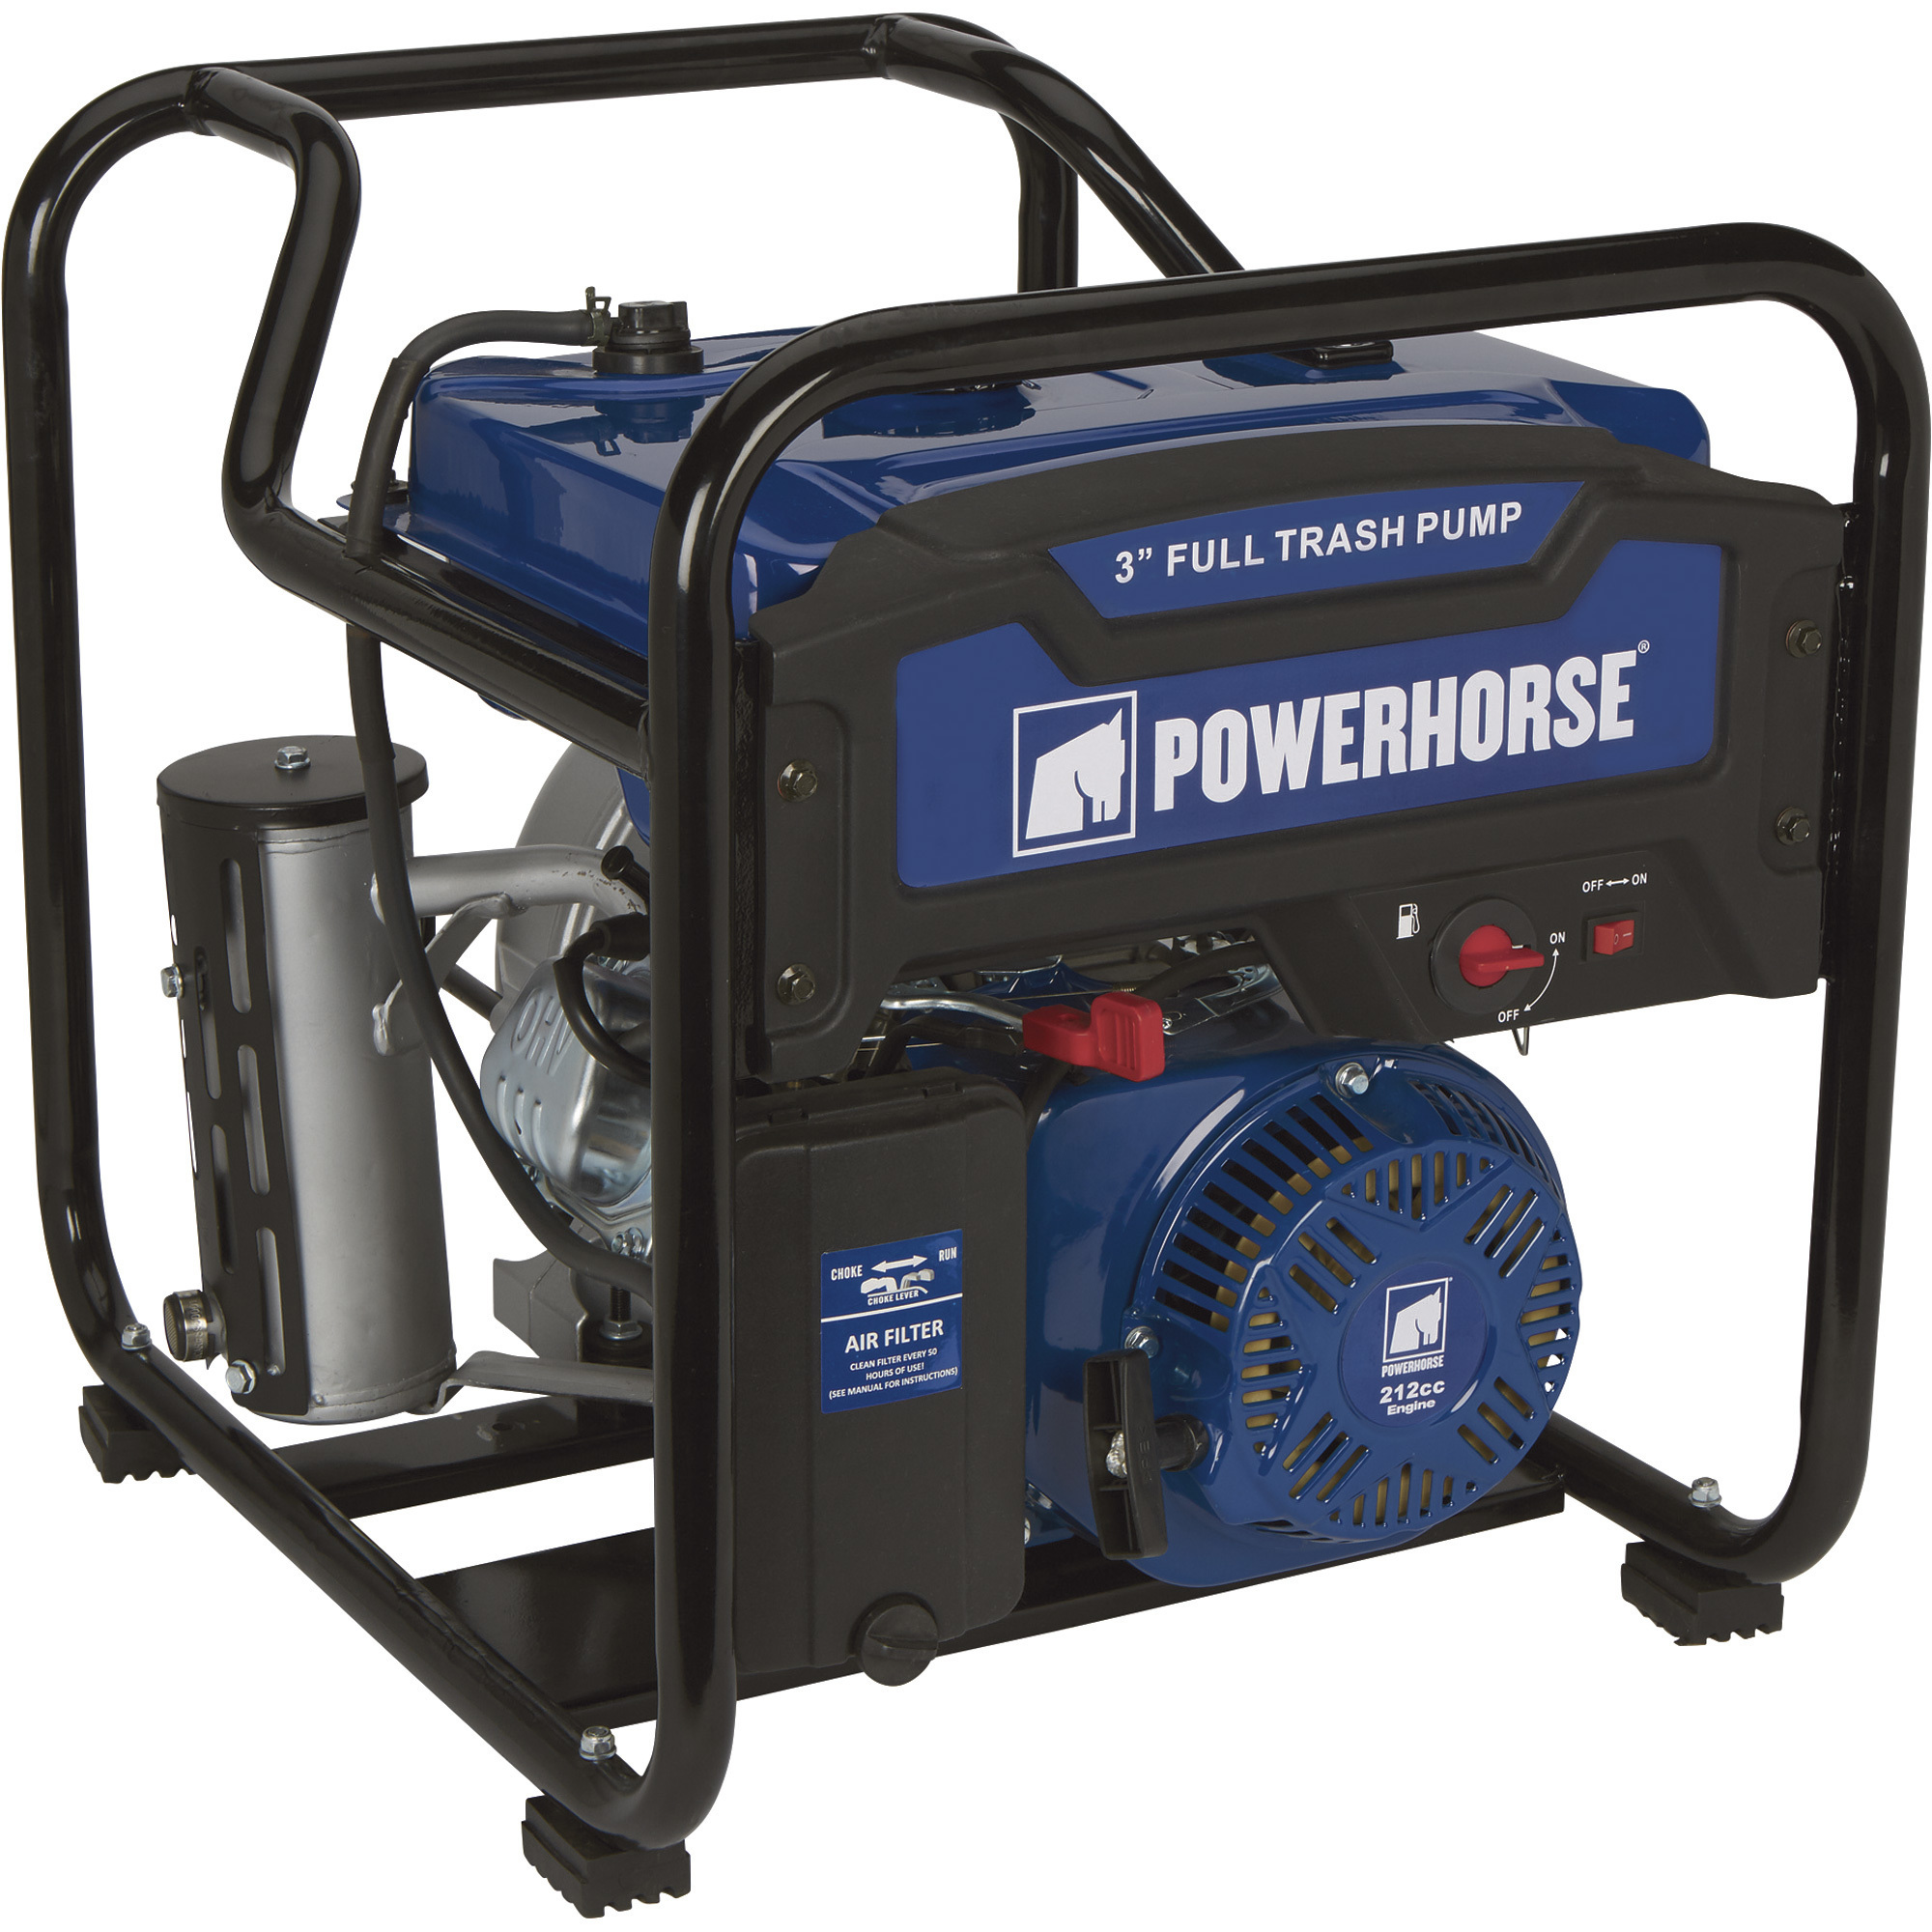 Powerhorse Extended Run Full-Trash Pump, 3Inch Ports, 11,820 GPH, 1 1/8Inch Solids Capacity, 212cc OHV Engine, Model DS30W